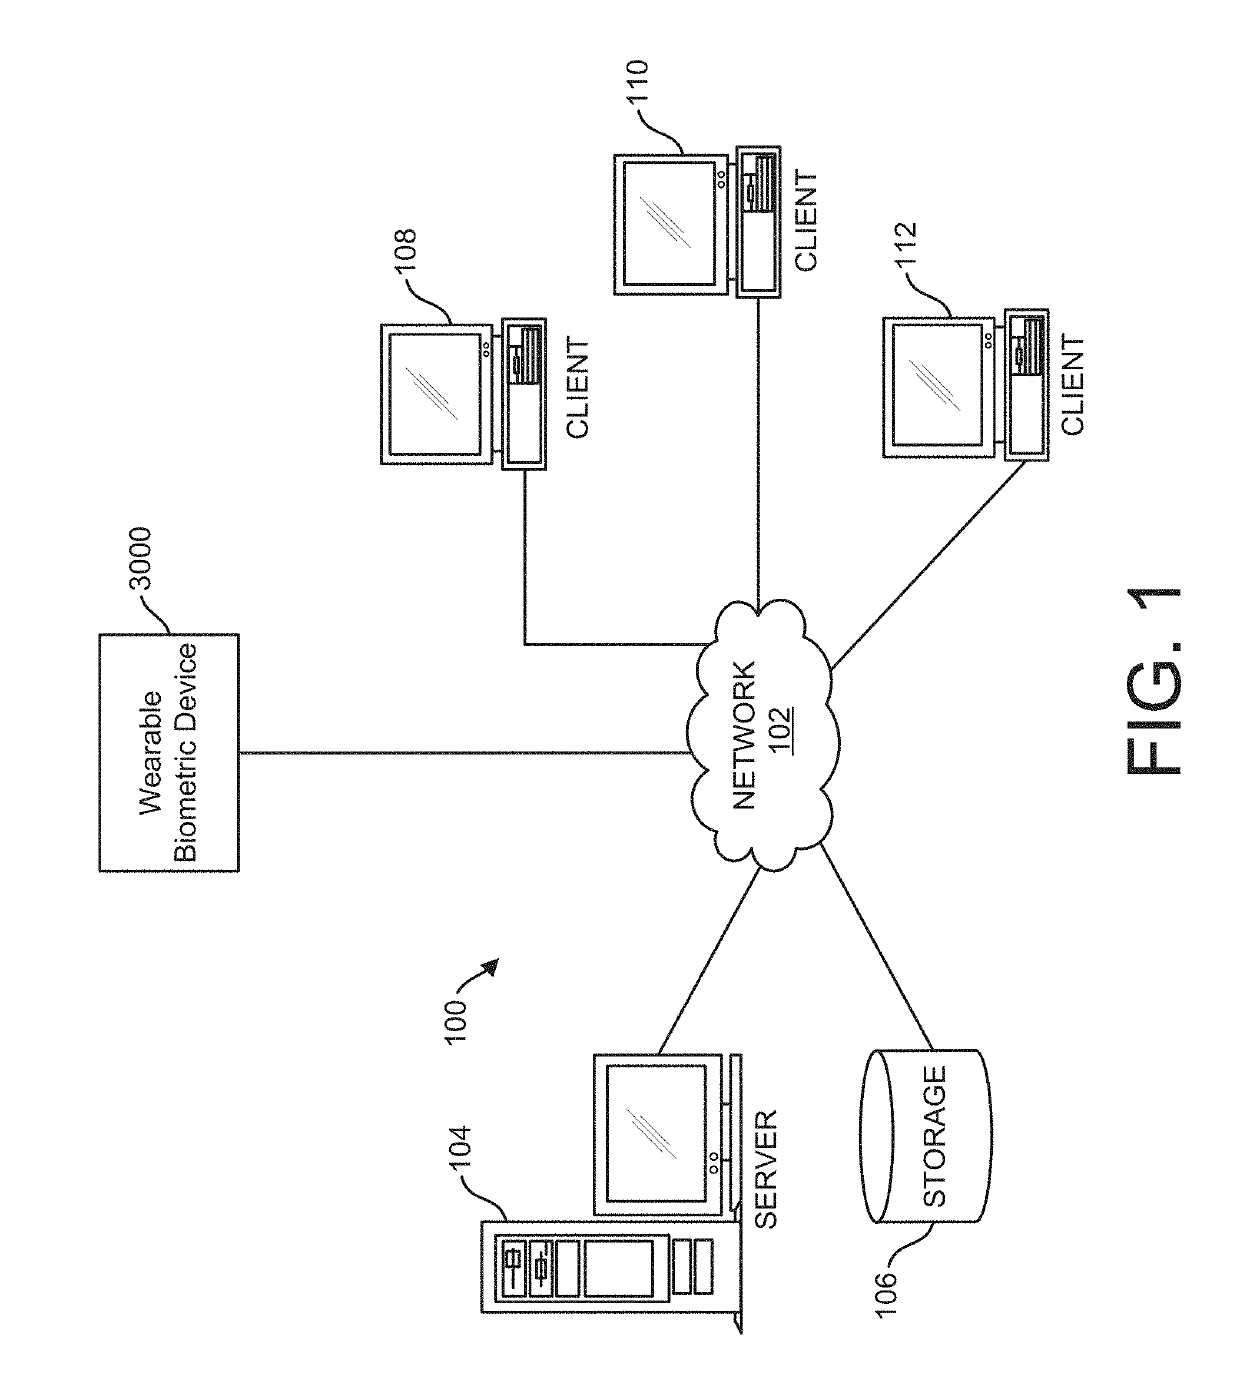 System, device and method for detecting and monitoring a biological stress response for financial rules behavior